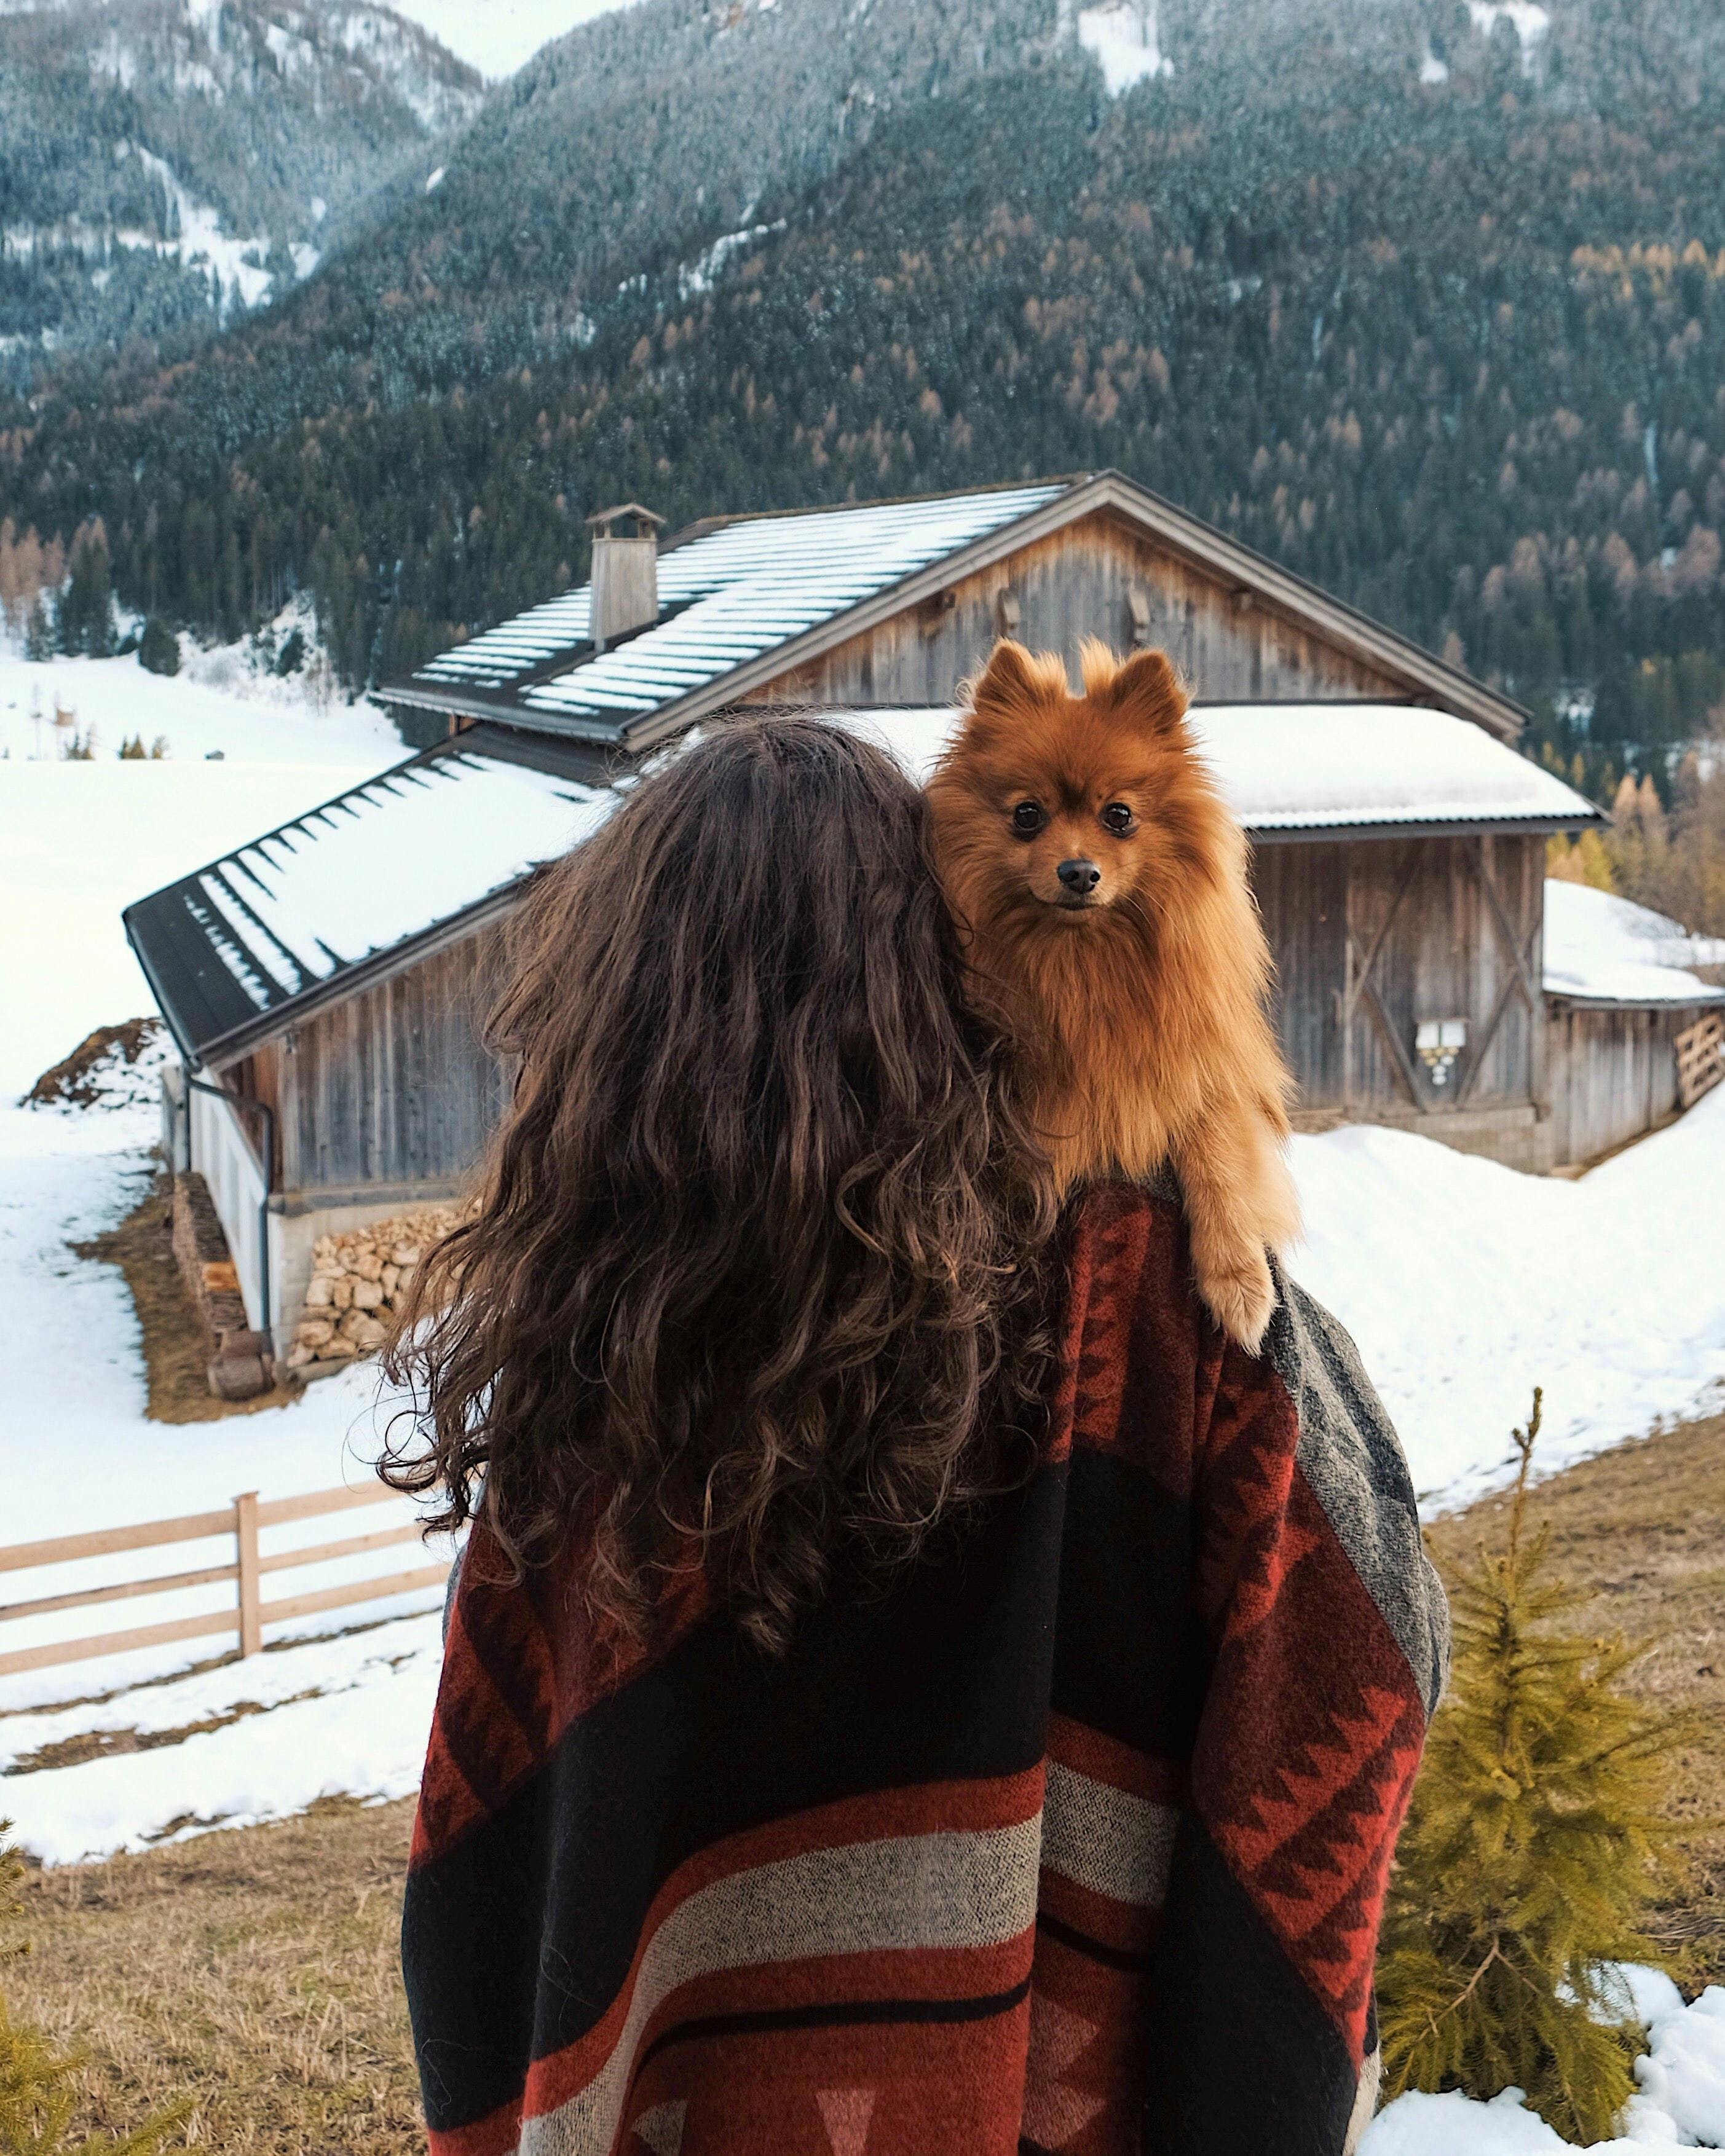 Small dog looking over woman's should with a snowy barn in the background